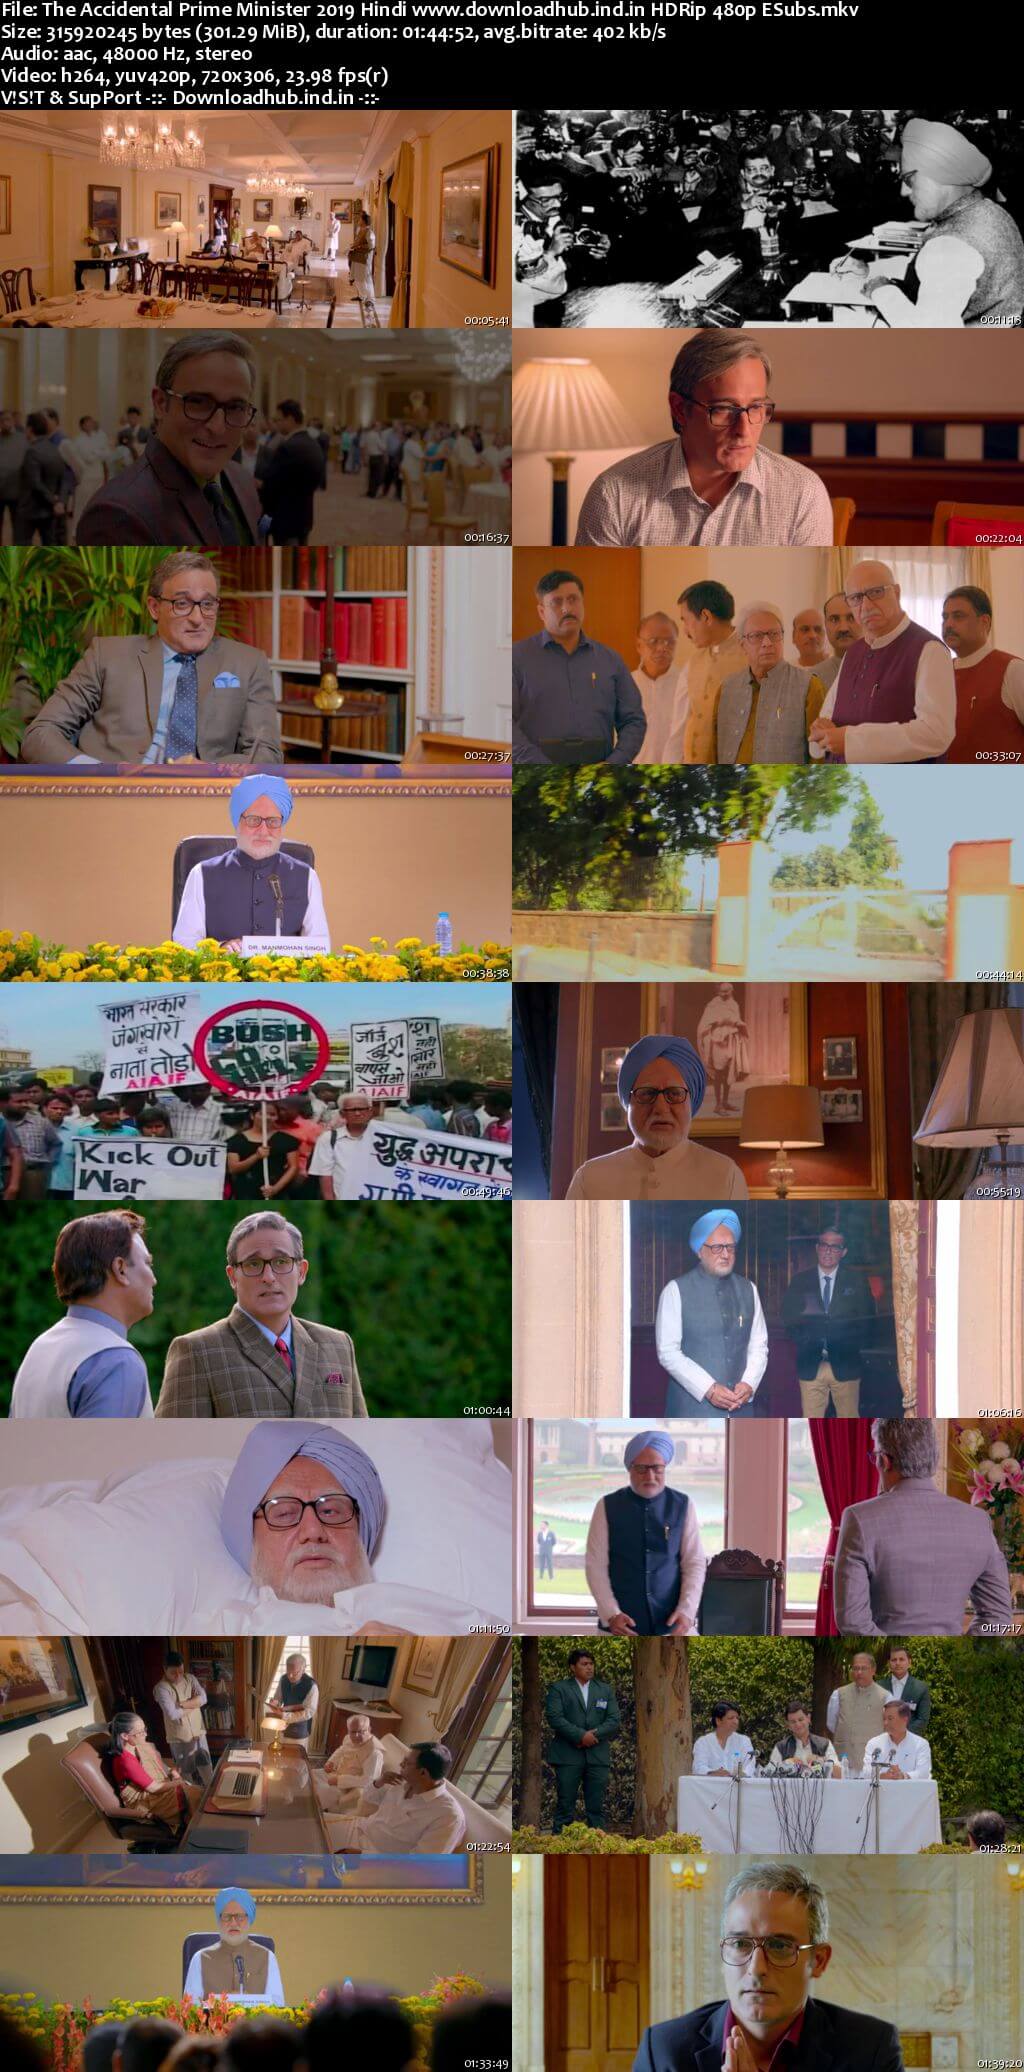 The Accidental Prime Minister 2019 Hindi 300MB HDRip 480p ESubs